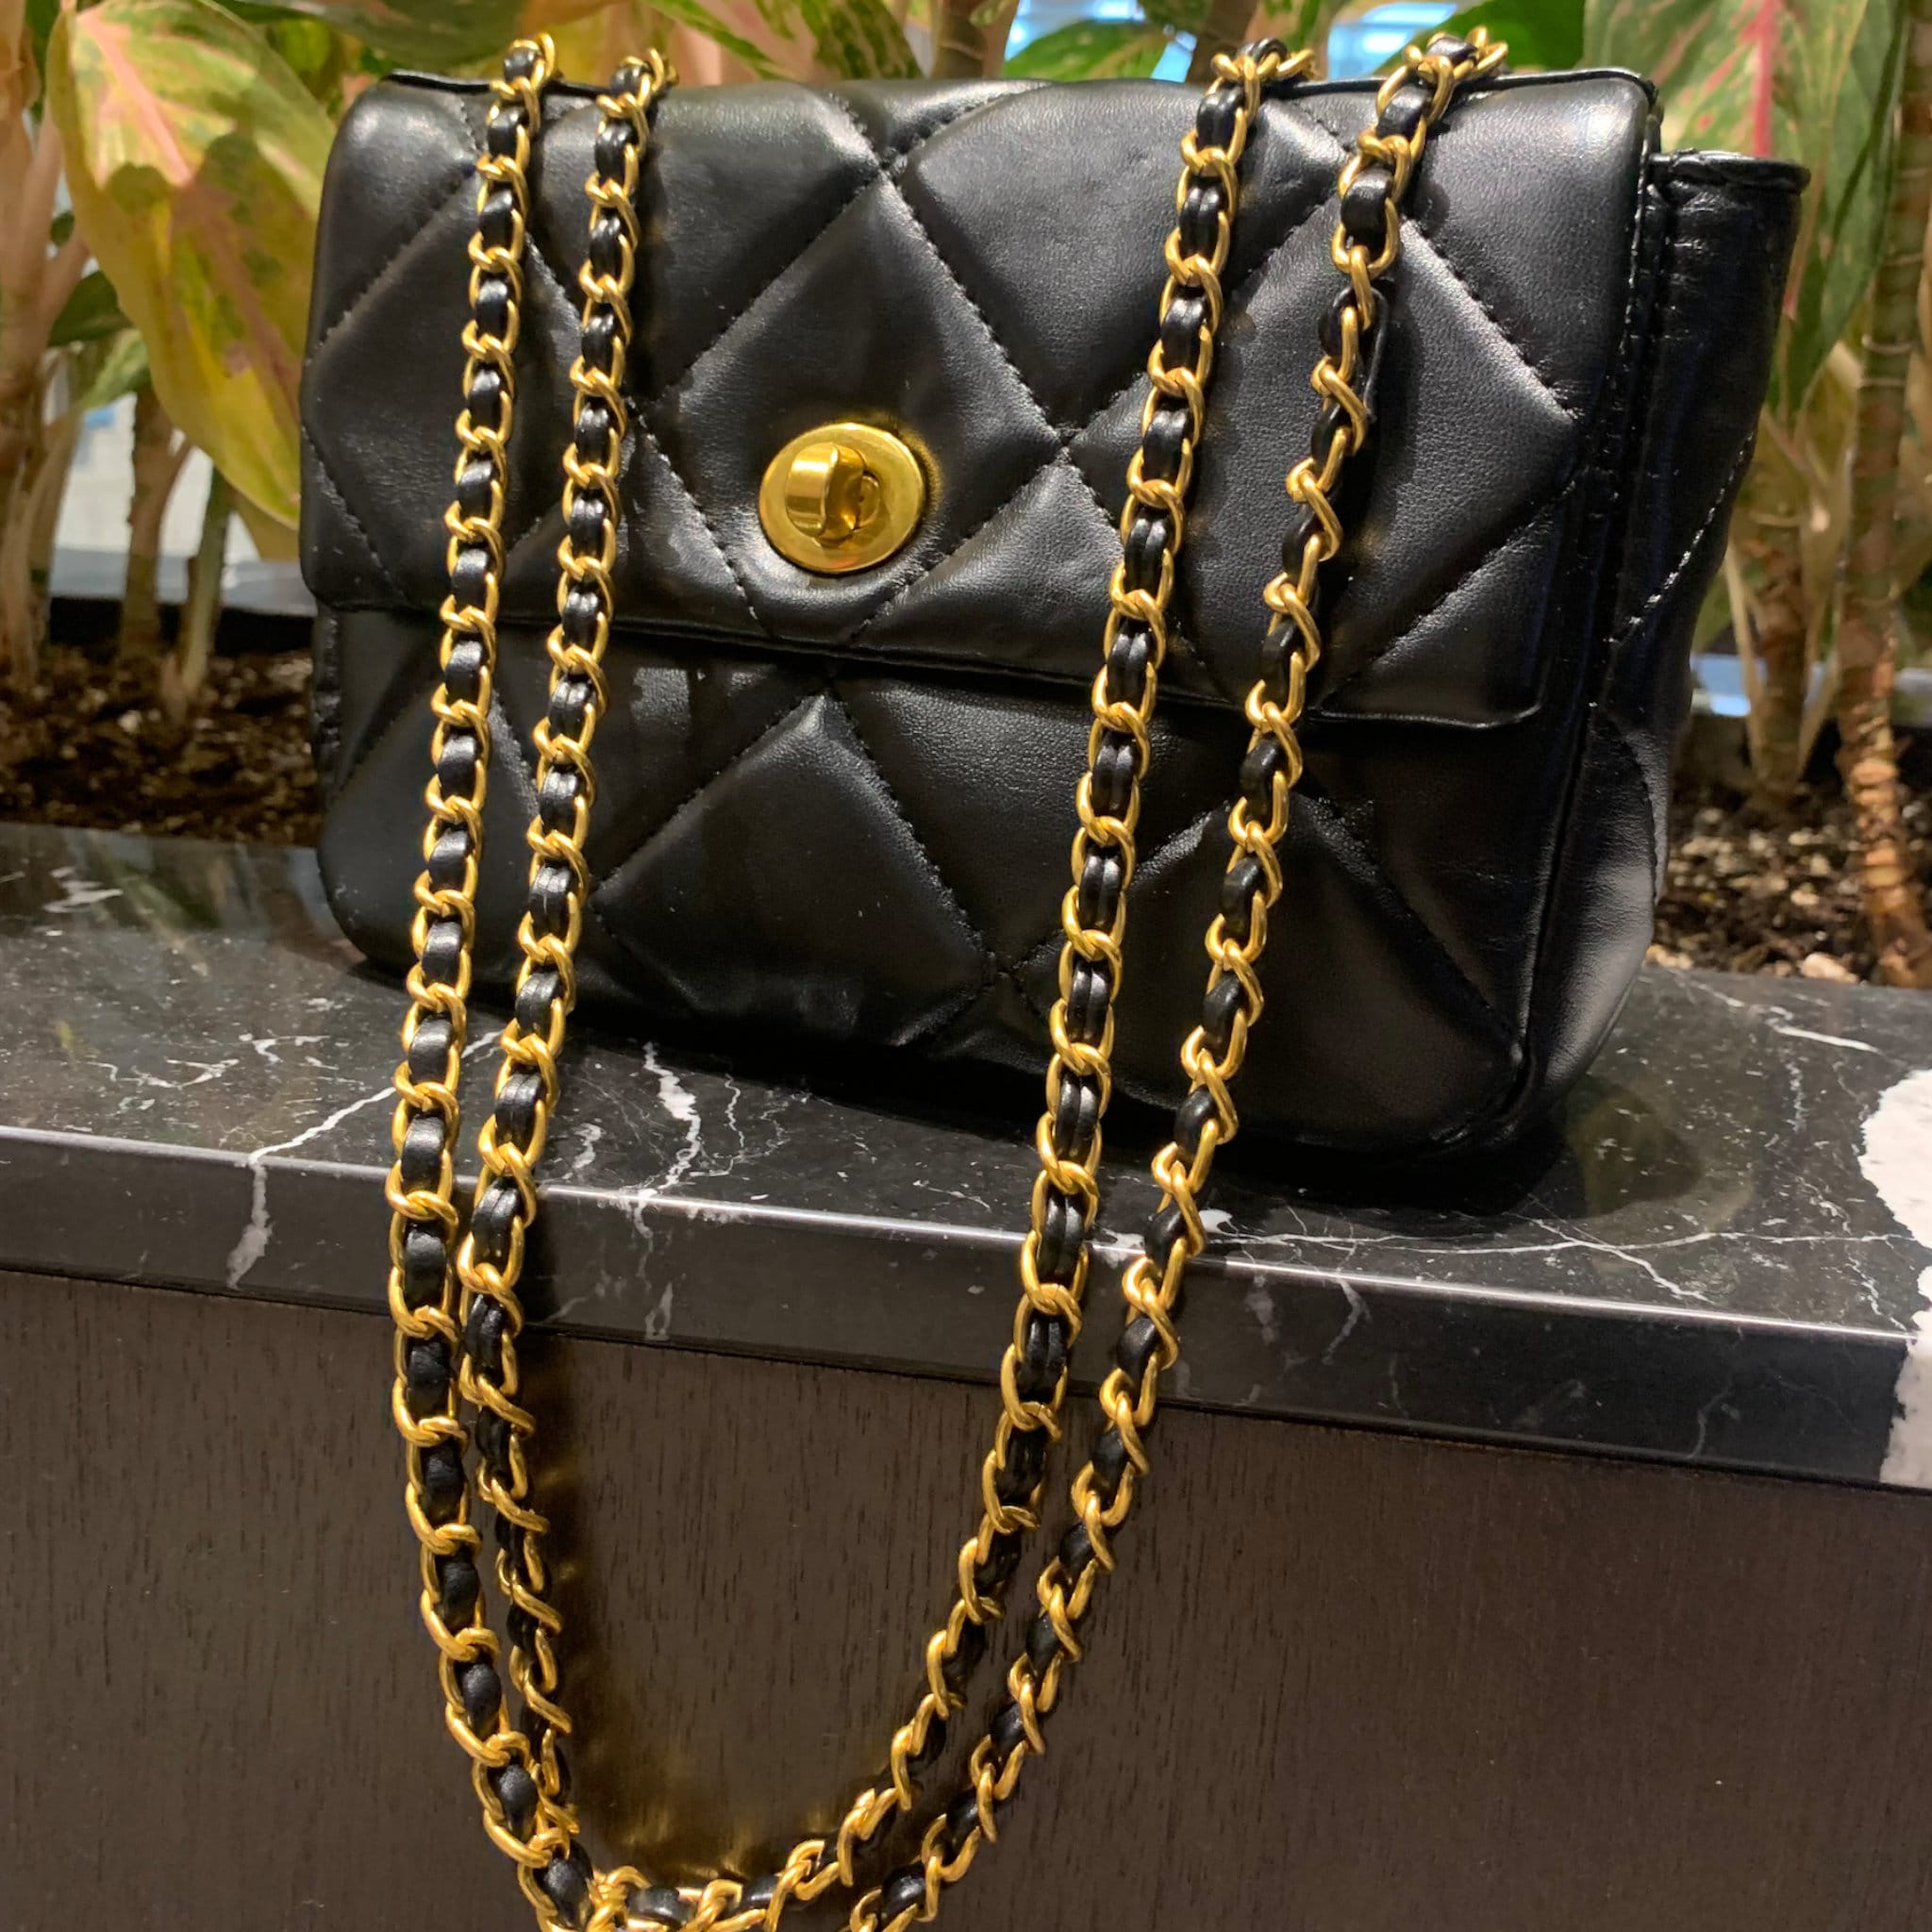 25 Giftable Designer Bags Without The Chanel Price Tag - The Mom Edit